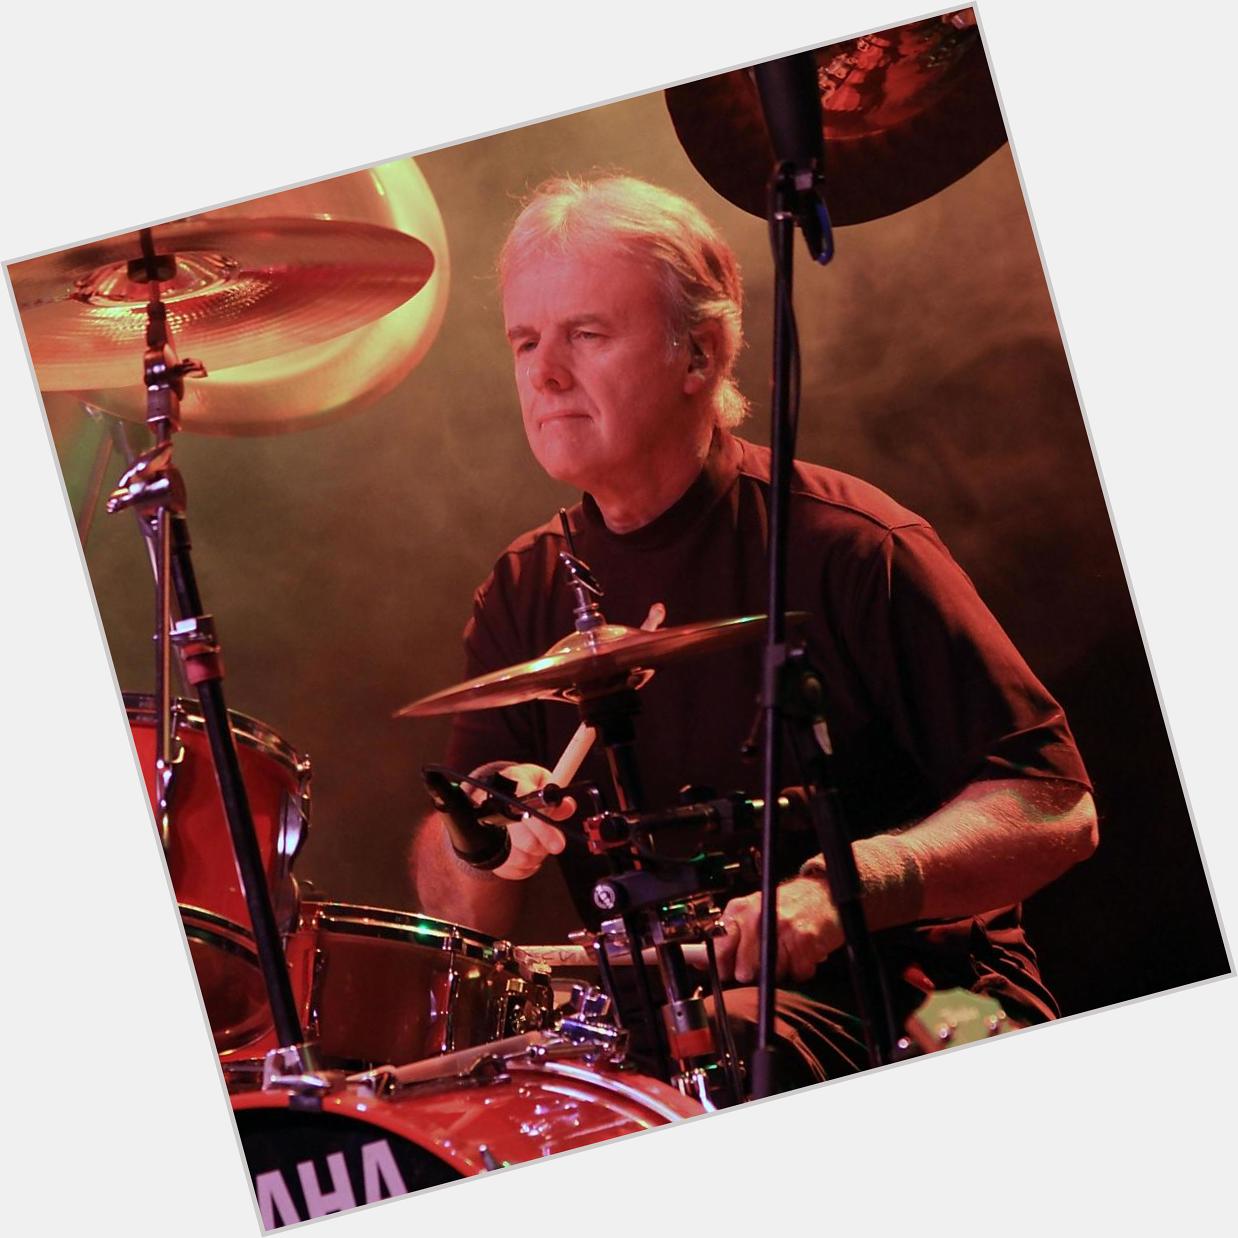 Happy Birthday to Kansas drummer and percussionist Phil Ehart, born on this day in Coffeyville, Kansas in 1950.    